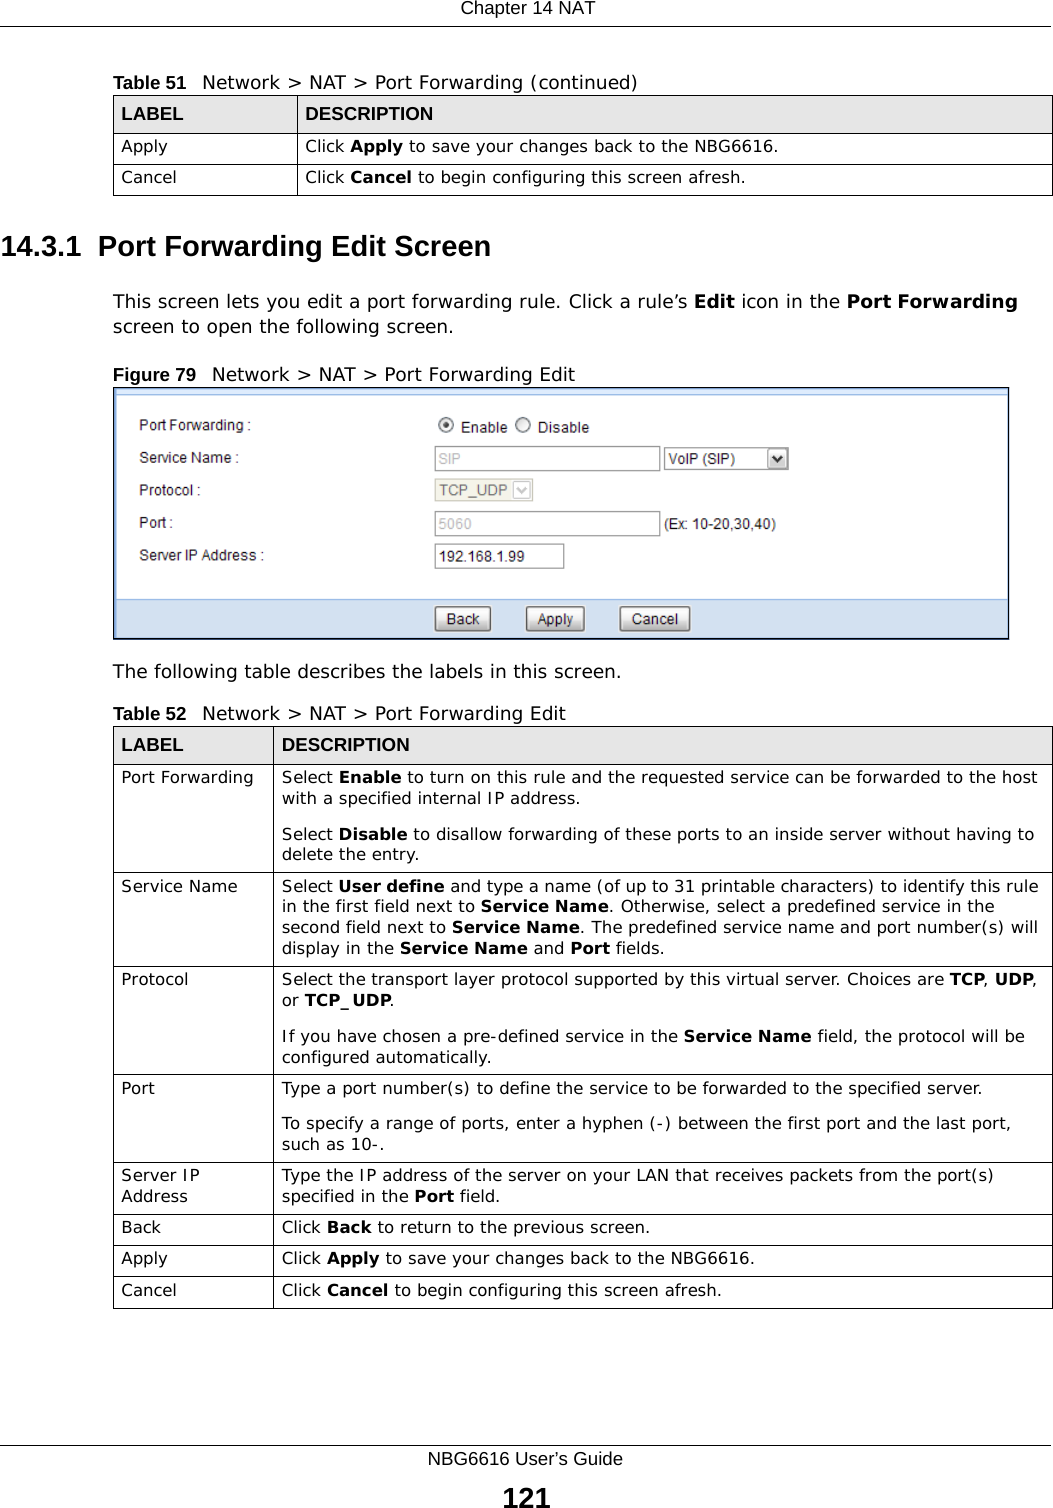  Chapter 14 NATNBG6616 User’s Guide12114.3.1  Port Forwarding Edit Screen This screen lets you edit a port forwarding rule. Click a rule’s Edit icon in the Port Forwarding screen to open the following screen.Figure 79   Network &gt; NAT &gt; Port Forwarding Edit The following table describes the labels in this screen. Apply Click Apply to save your changes back to the NBG6616.Cancel Click Cancel to begin configuring this screen afresh.Table 51   Network &gt; NAT &gt; Port Forwarding (continued)LABEL DESCRIPTIONTable 52   Network &gt; NAT &gt; Port Forwarding EditLABEL DESCRIPTIONPort Forwarding Select Enable to turn on this rule and the requested service can be forwarded to the host with a specified internal IP address.Select Disable to disallow forwarding of these ports to an inside server without having to delete the entry. Service Name Select User define and type a name (of up to 31 printable characters) to identify this rule in the first field next to Service Name. Otherwise, select a predefined service in the second field next to Service Name. The predefined service name and port number(s) will display in the Service Name and Port fields.Protocol Select the transport layer protocol supported by this virtual server. Choices are TCP, UDP, or TCP_UDP. If you have chosen a pre-defined service in the Service Name field, the protocol will be configured automatically.Port Type a port number(s) to define the service to be forwarded to the specified server.To specify a range of ports, enter a hyphen (-) between the first port and the last port, such as 10-.Server IP Address Type the IP address of the server on your LAN that receives packets from the port(s) specified in the Port field.Back Click Back to return to the previous screen.Apply Click Apply to save your changes back to the NBG6616.Cancel Click Cancel to begin configuring this screen afresh.